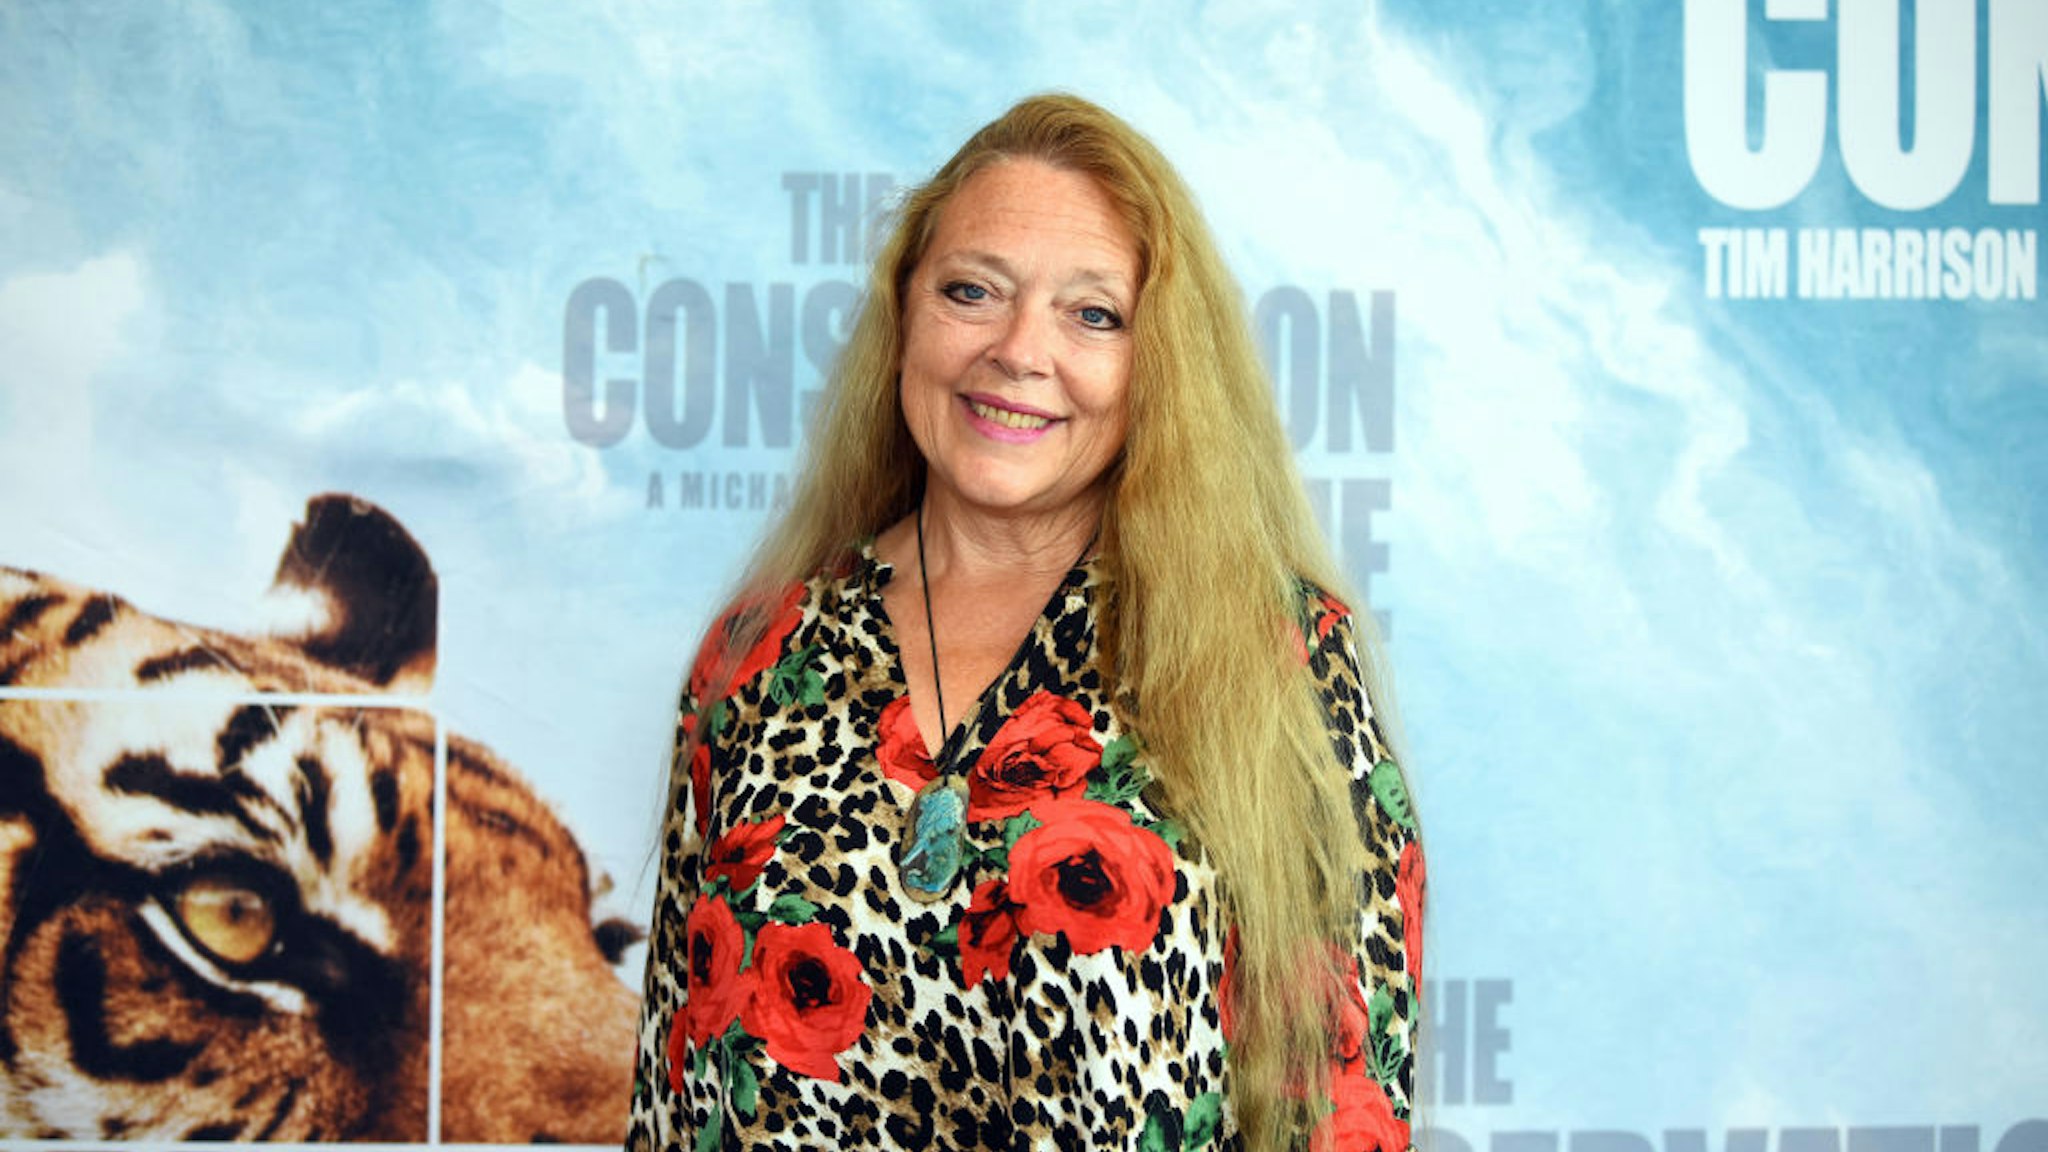 SANTA MONICA, CALIFORNIA - AUGUST 28: Carole Baskin attends the Los Angeles theatrical premiere of "The Conservation Game" on August 28, 2021 in Santa Monica, California. (Photo by Araya Doheny/Getty Images for NightFly Entertainment, Ltd.)